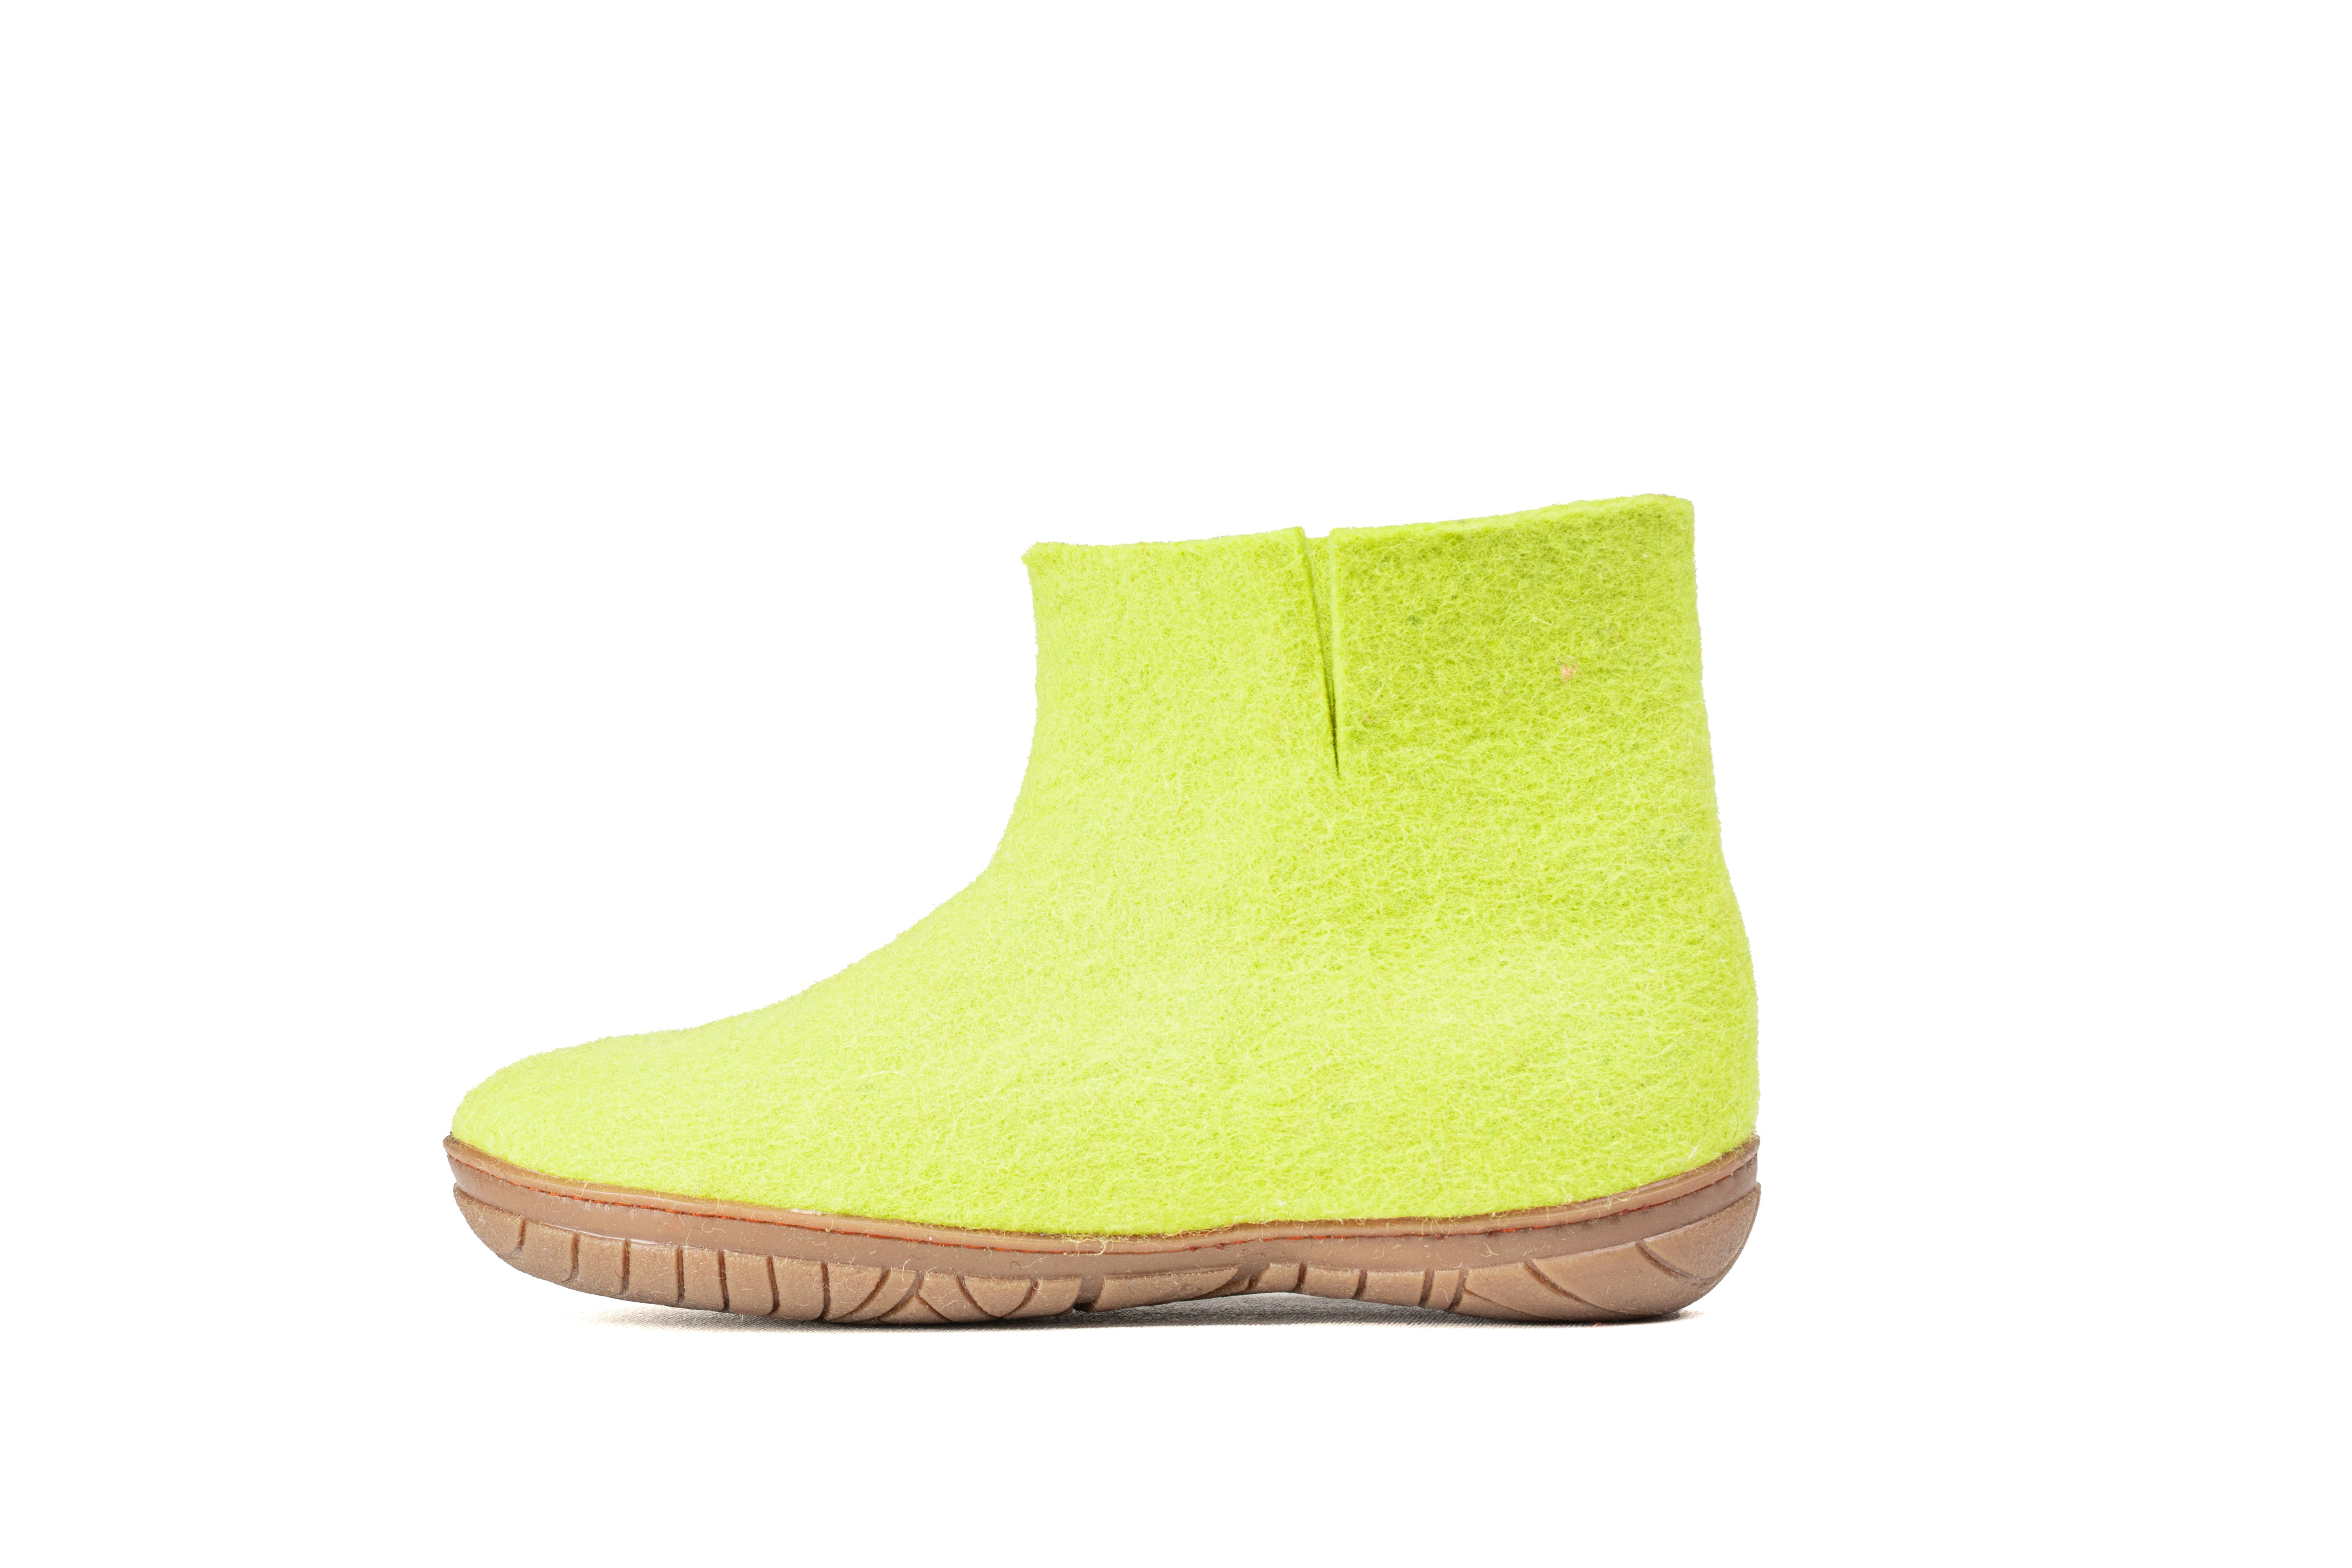 Outdoor Low Boots With Rubber Sole - Lime Green